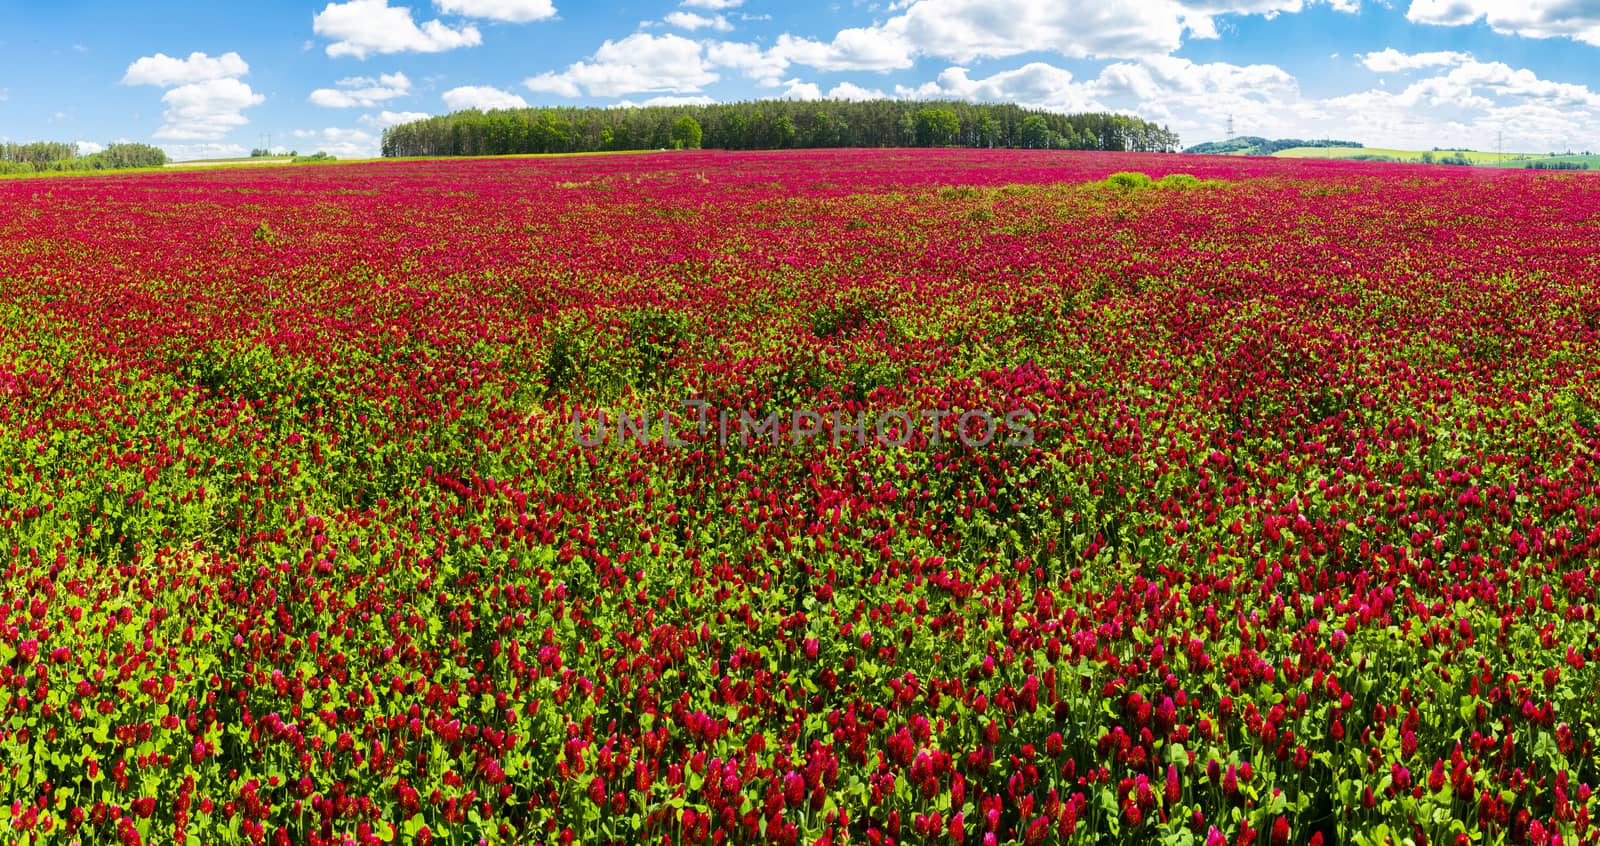 Panoramic photo of a red blooming crimson clover field (Trifolium incarnatum) with forest in the back